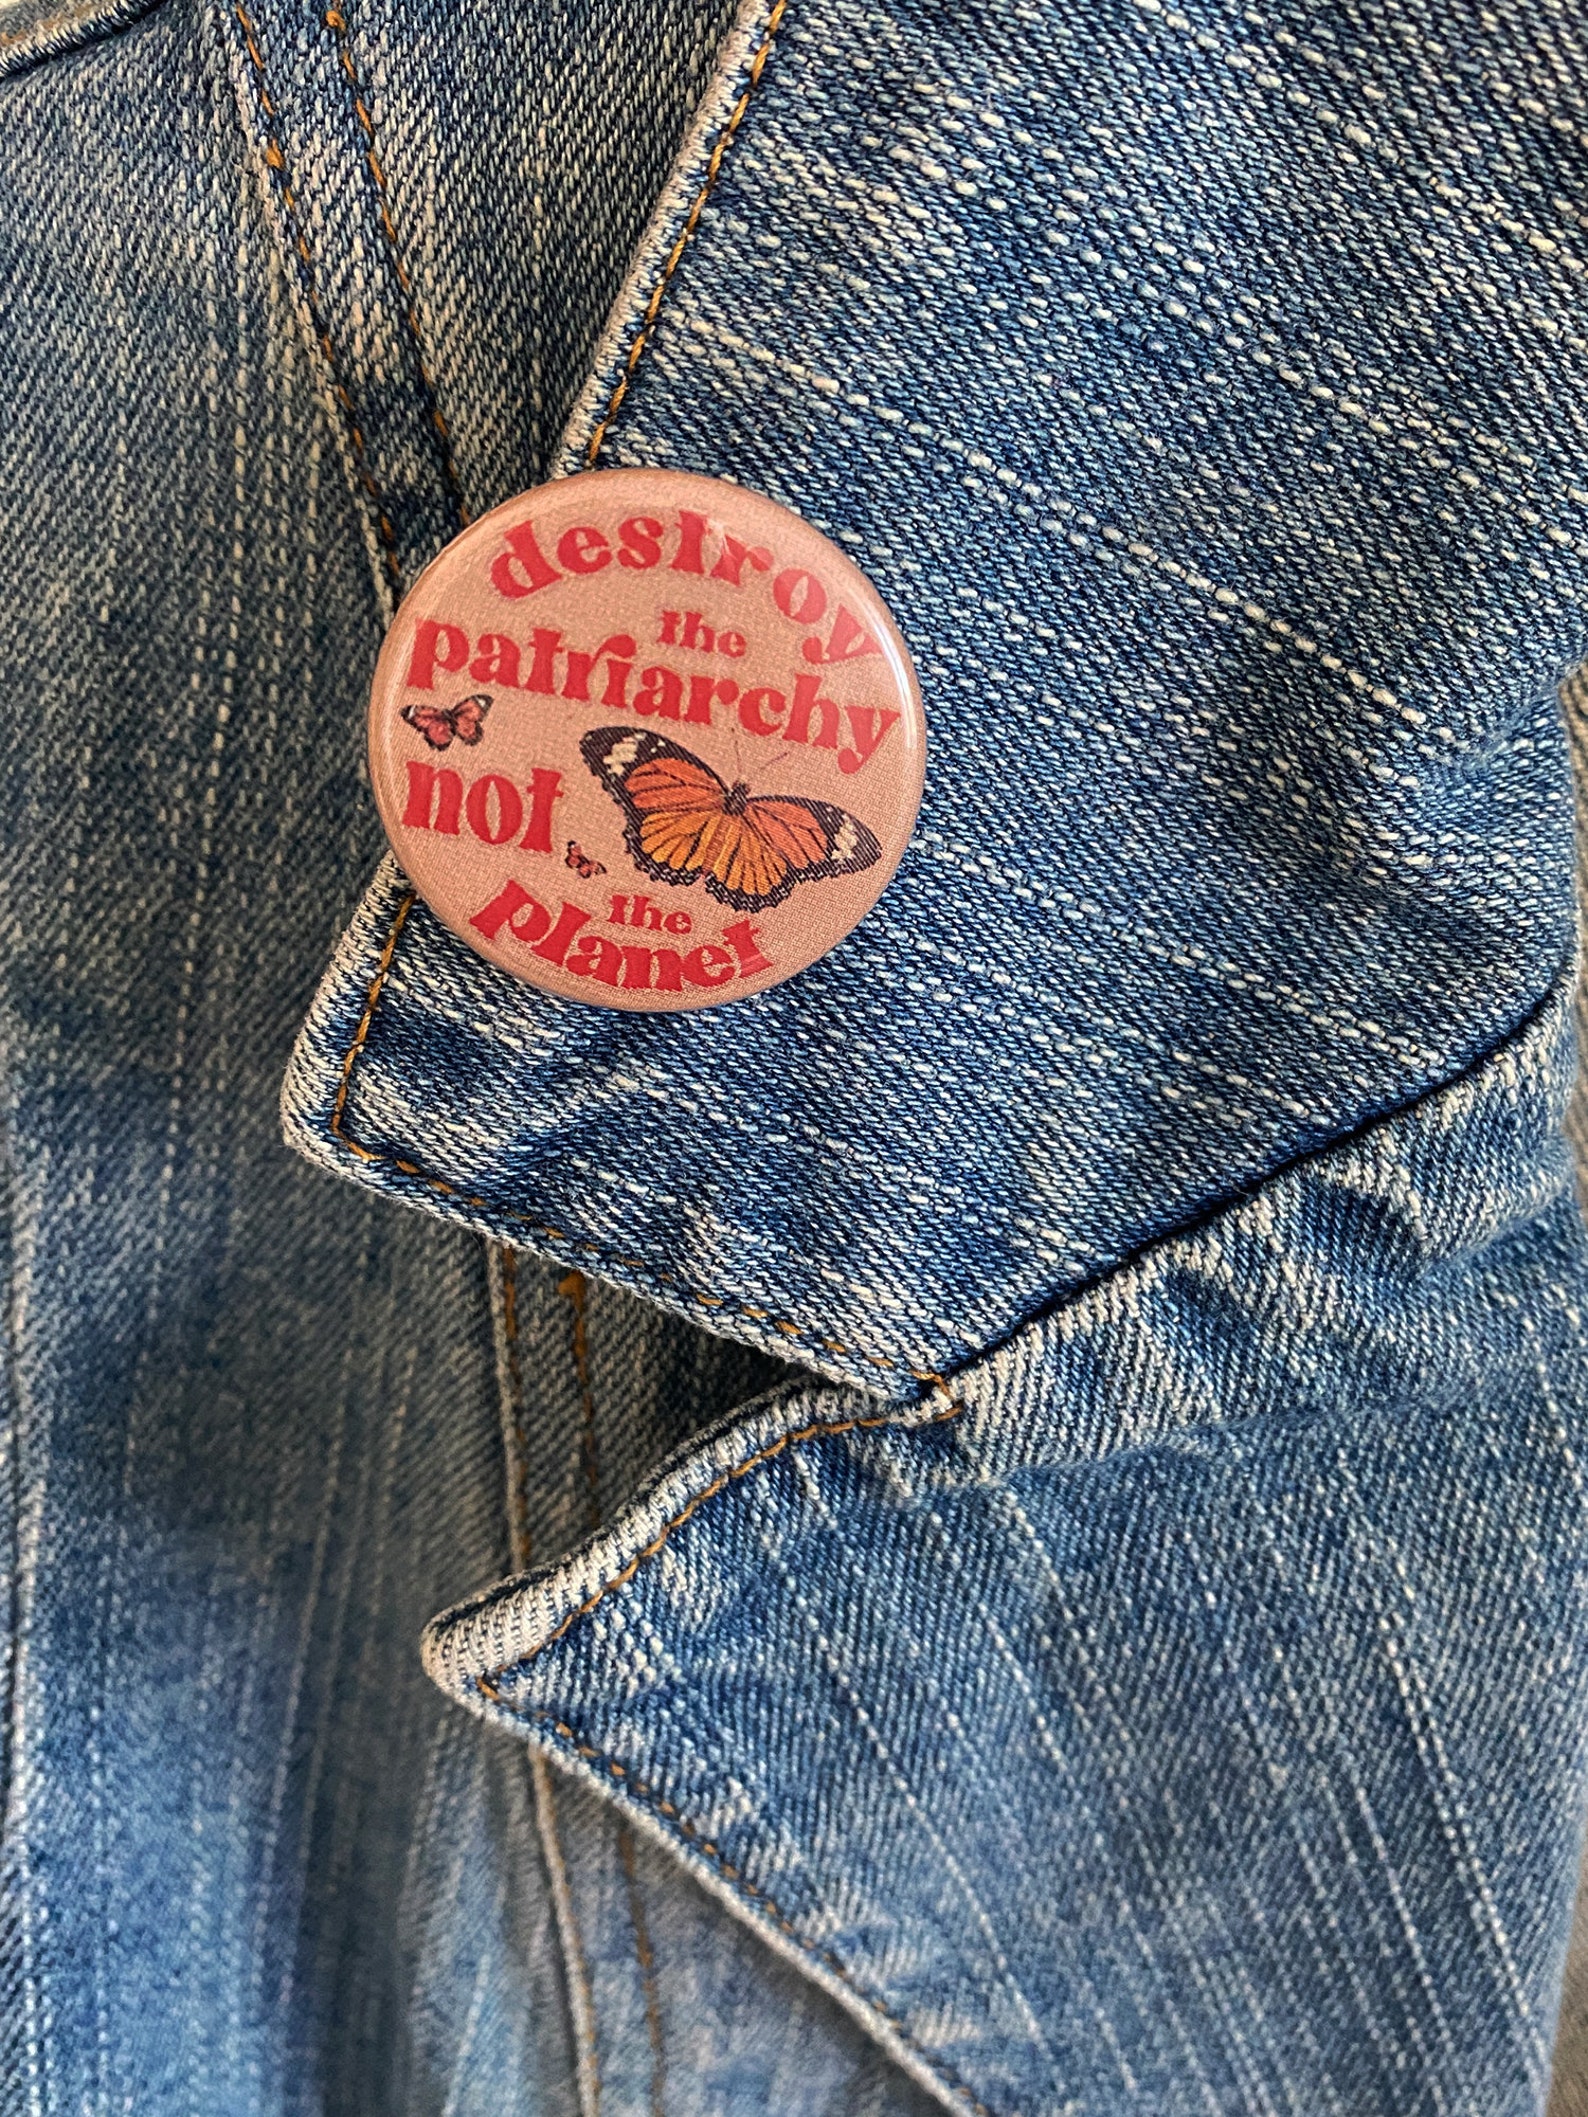 Feminist Button Destroy The Patriarchy Not the Planet | Etsy